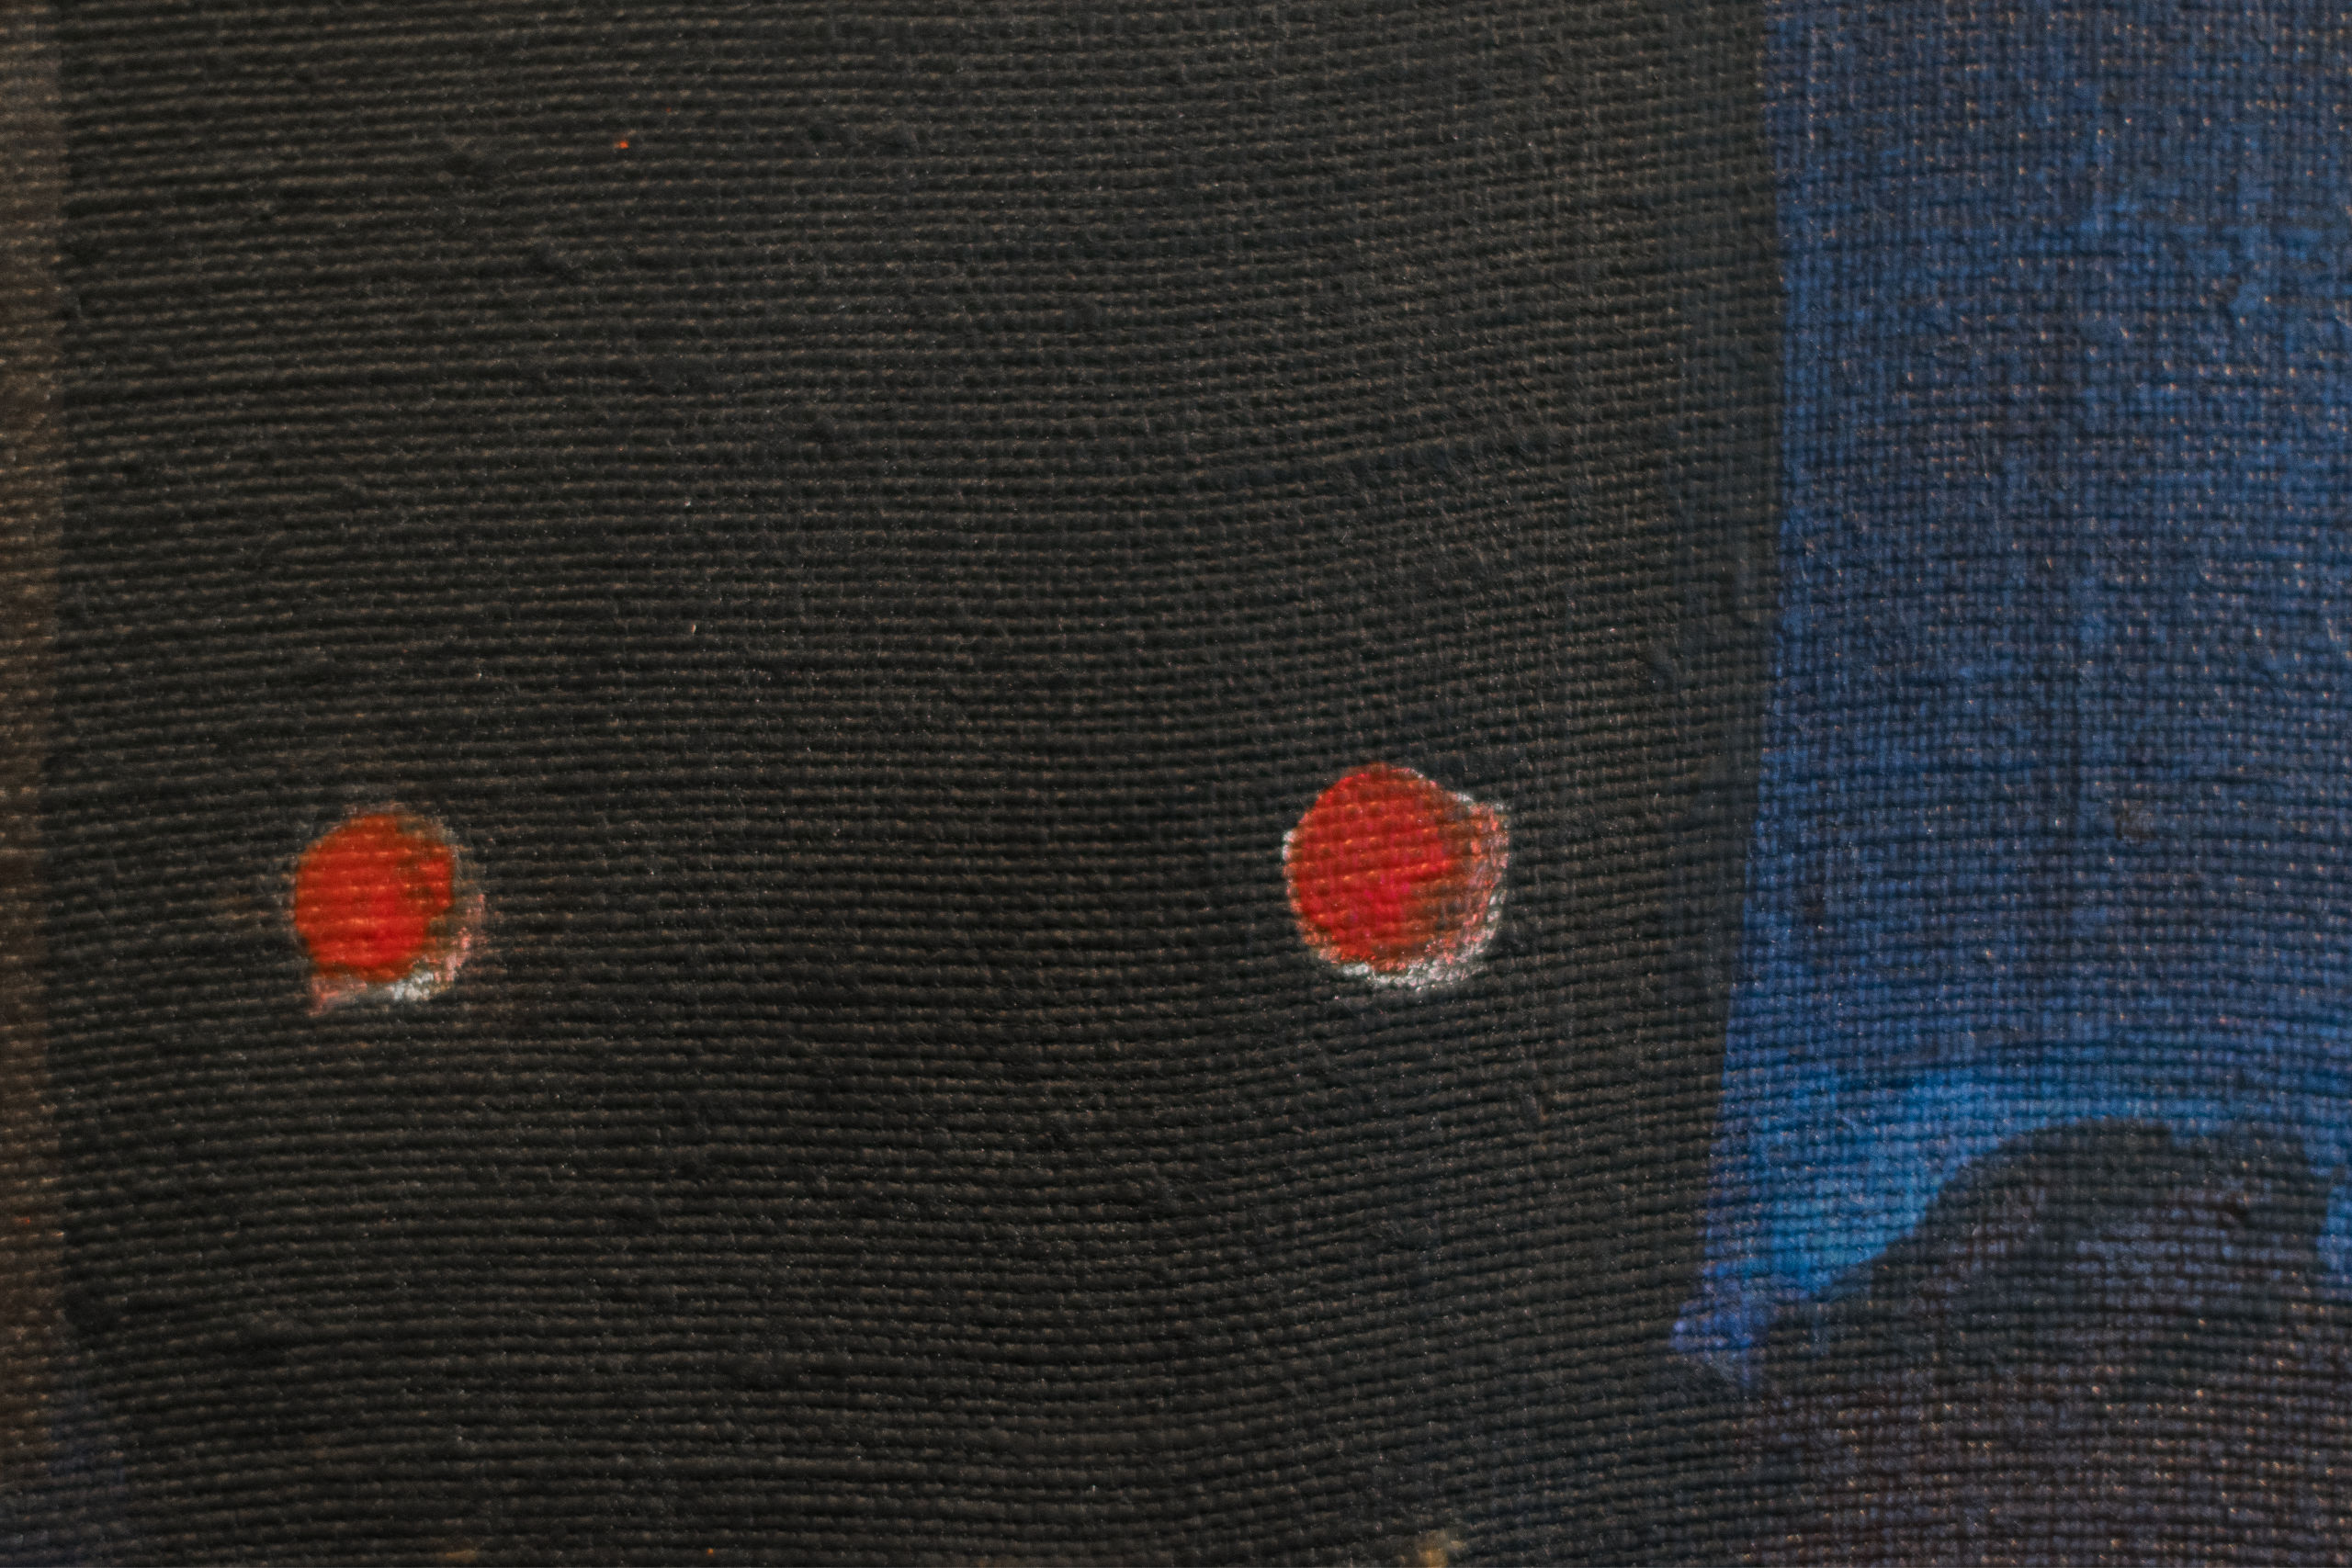 Close-up of painting showing black, blue and red tones.